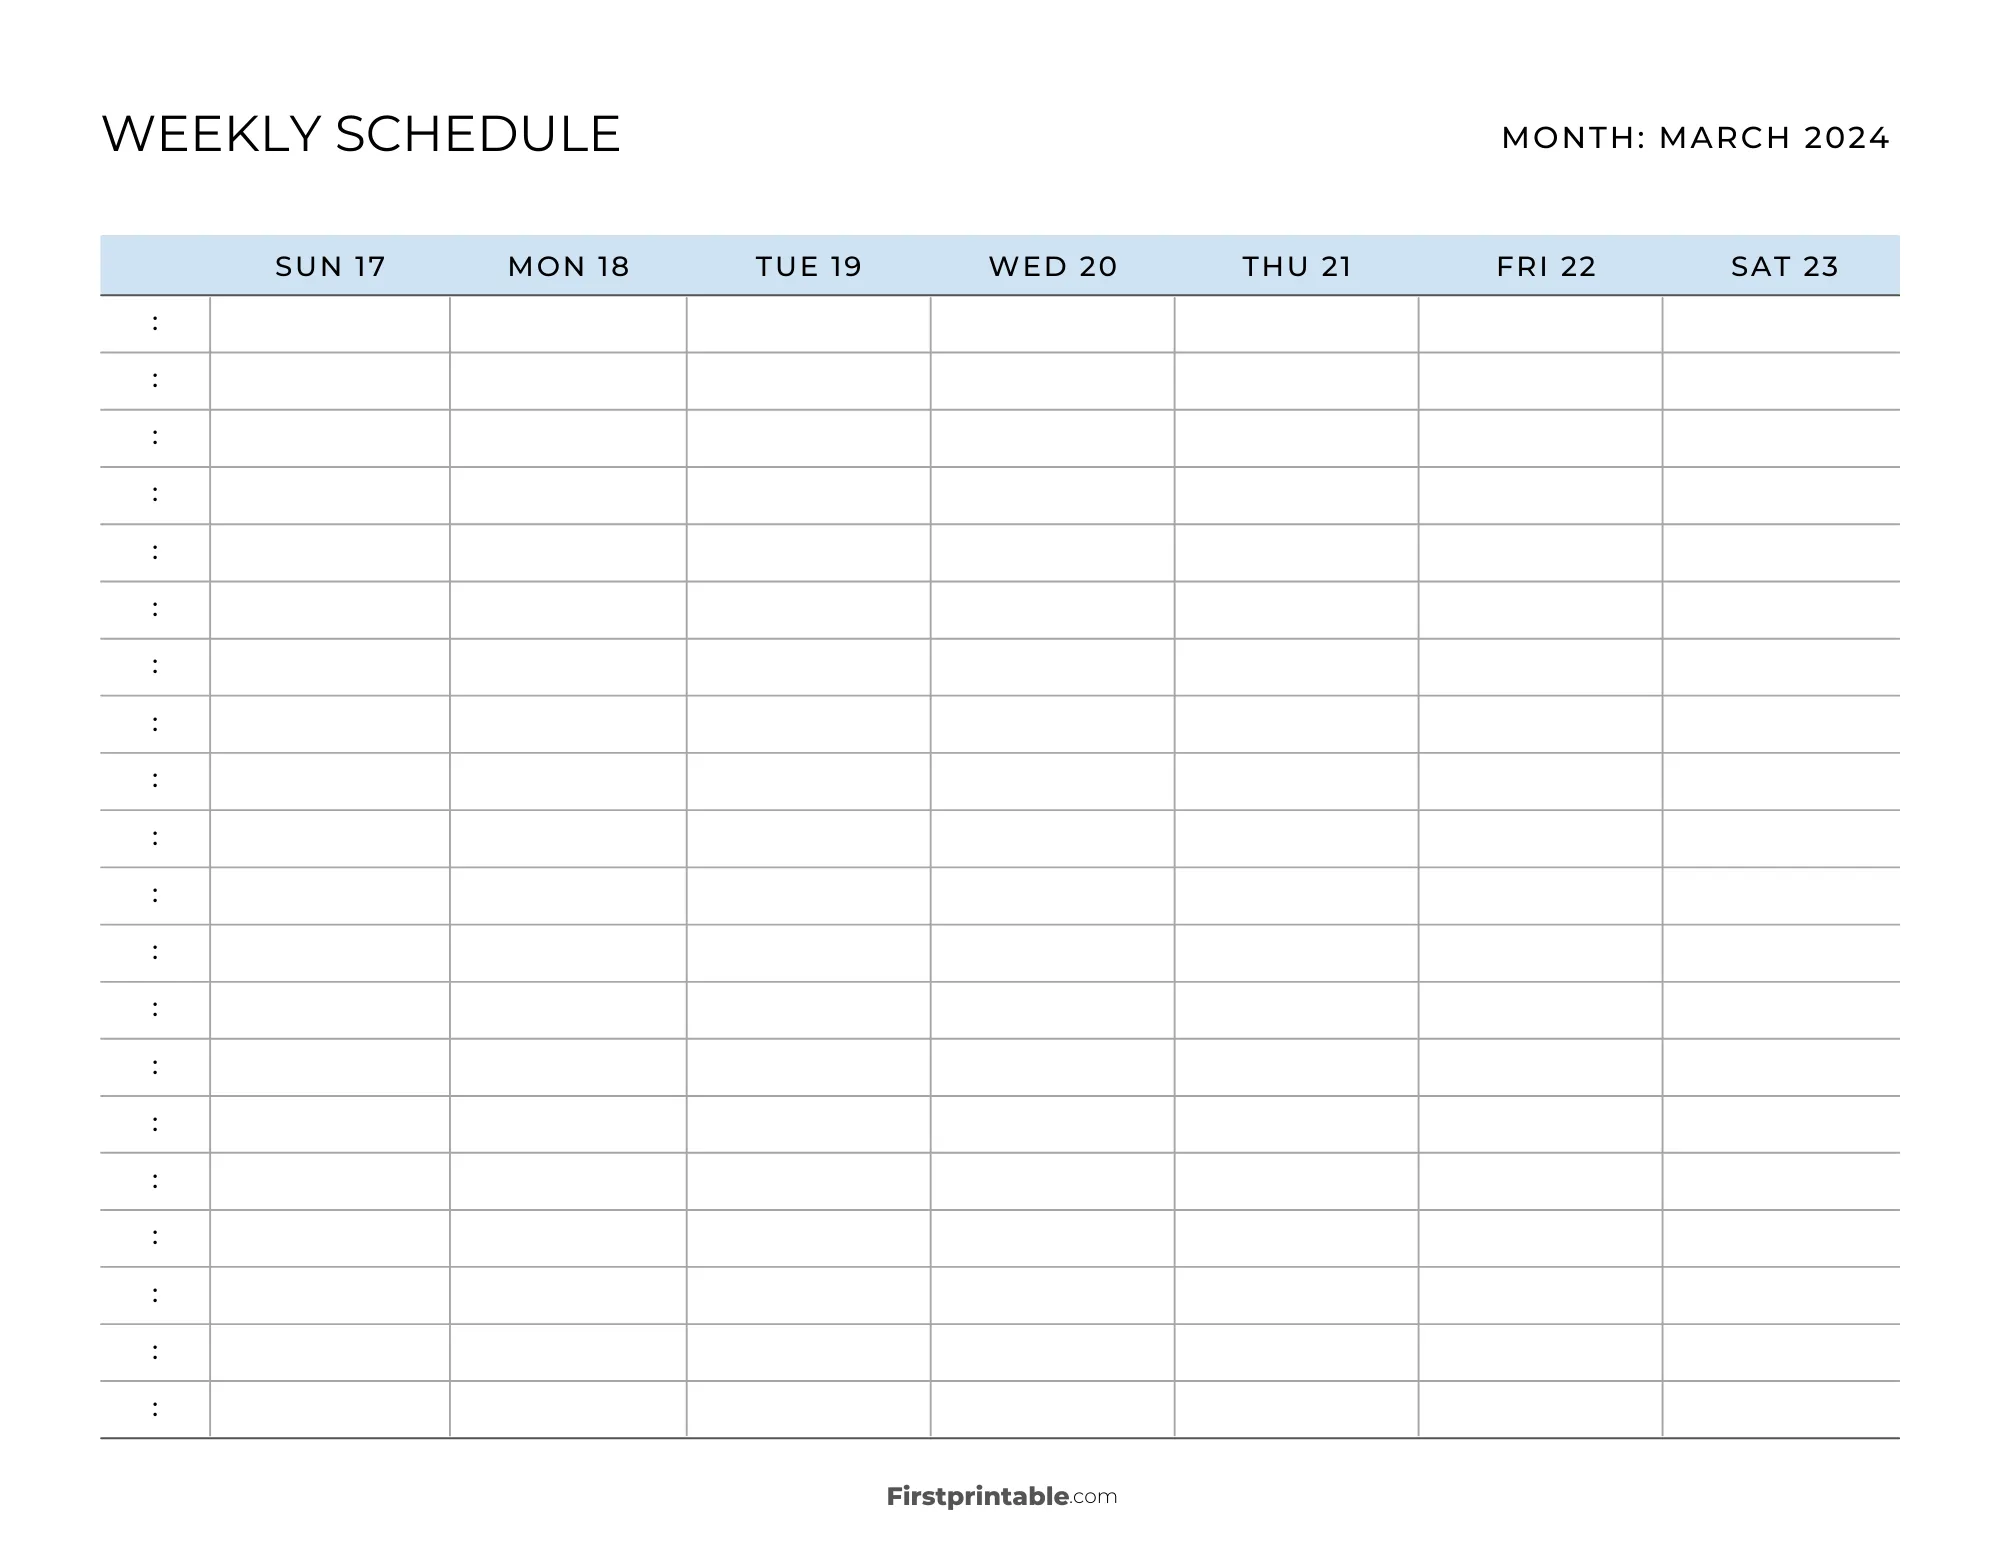 March 2024 Printable Weekly Schedule Template 04 - Blue